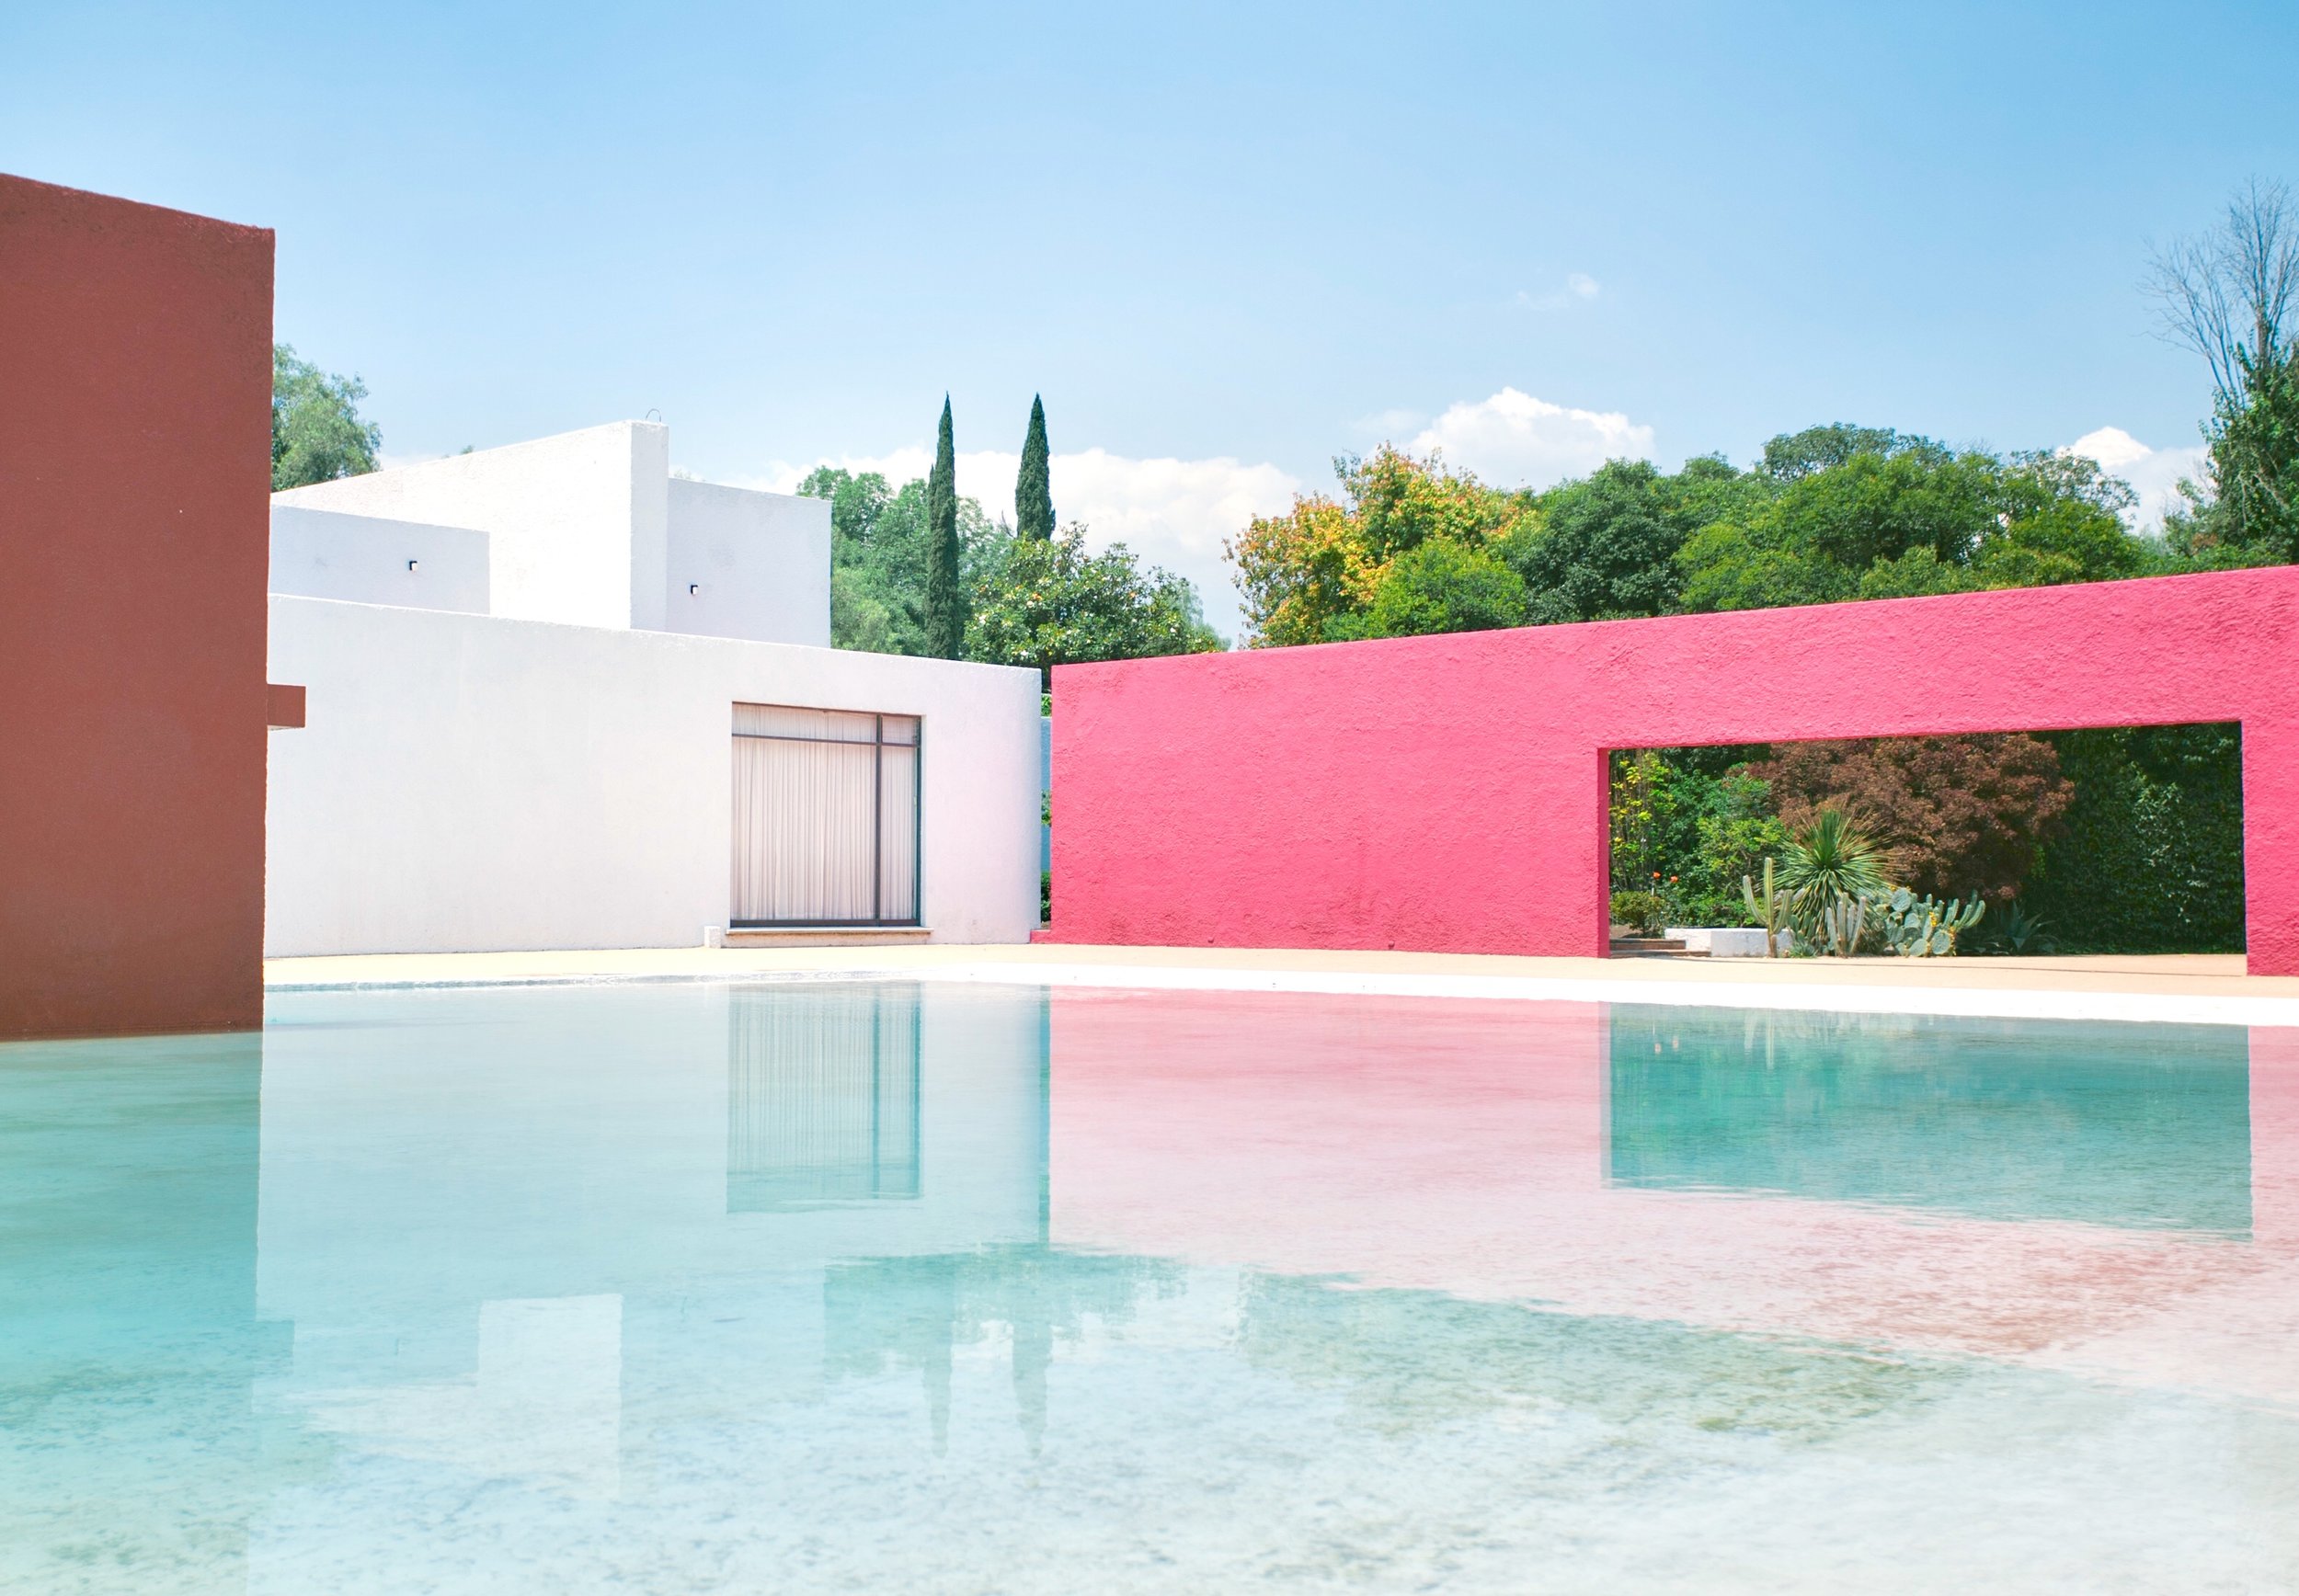 Volterre Loves: The Colorful Repose of Luis Barragán's Architecture ...